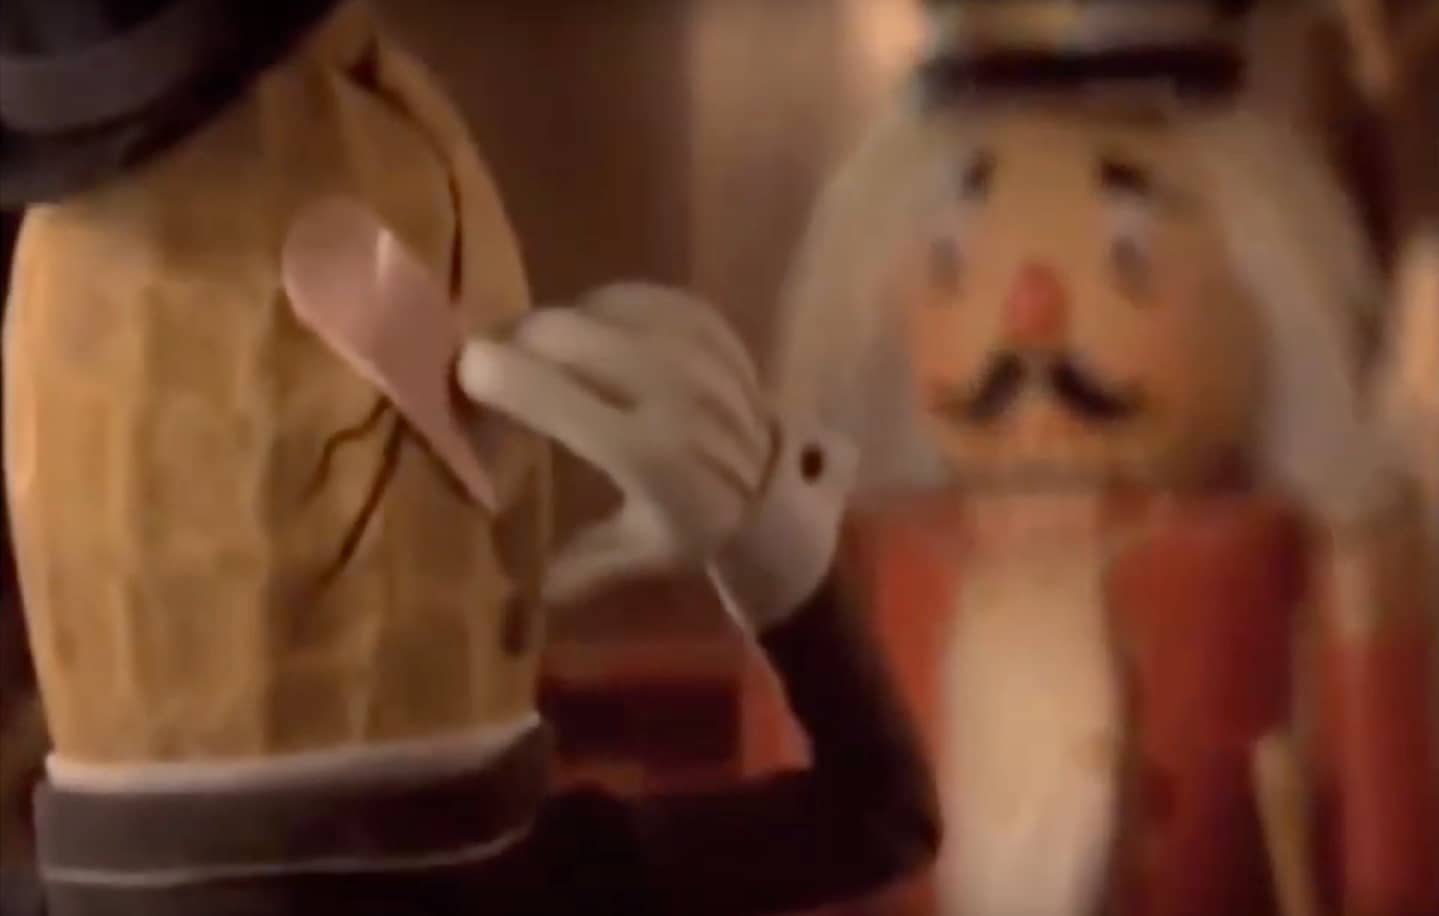 What We Can Learn from Mr. Peanut about Domestic Violence